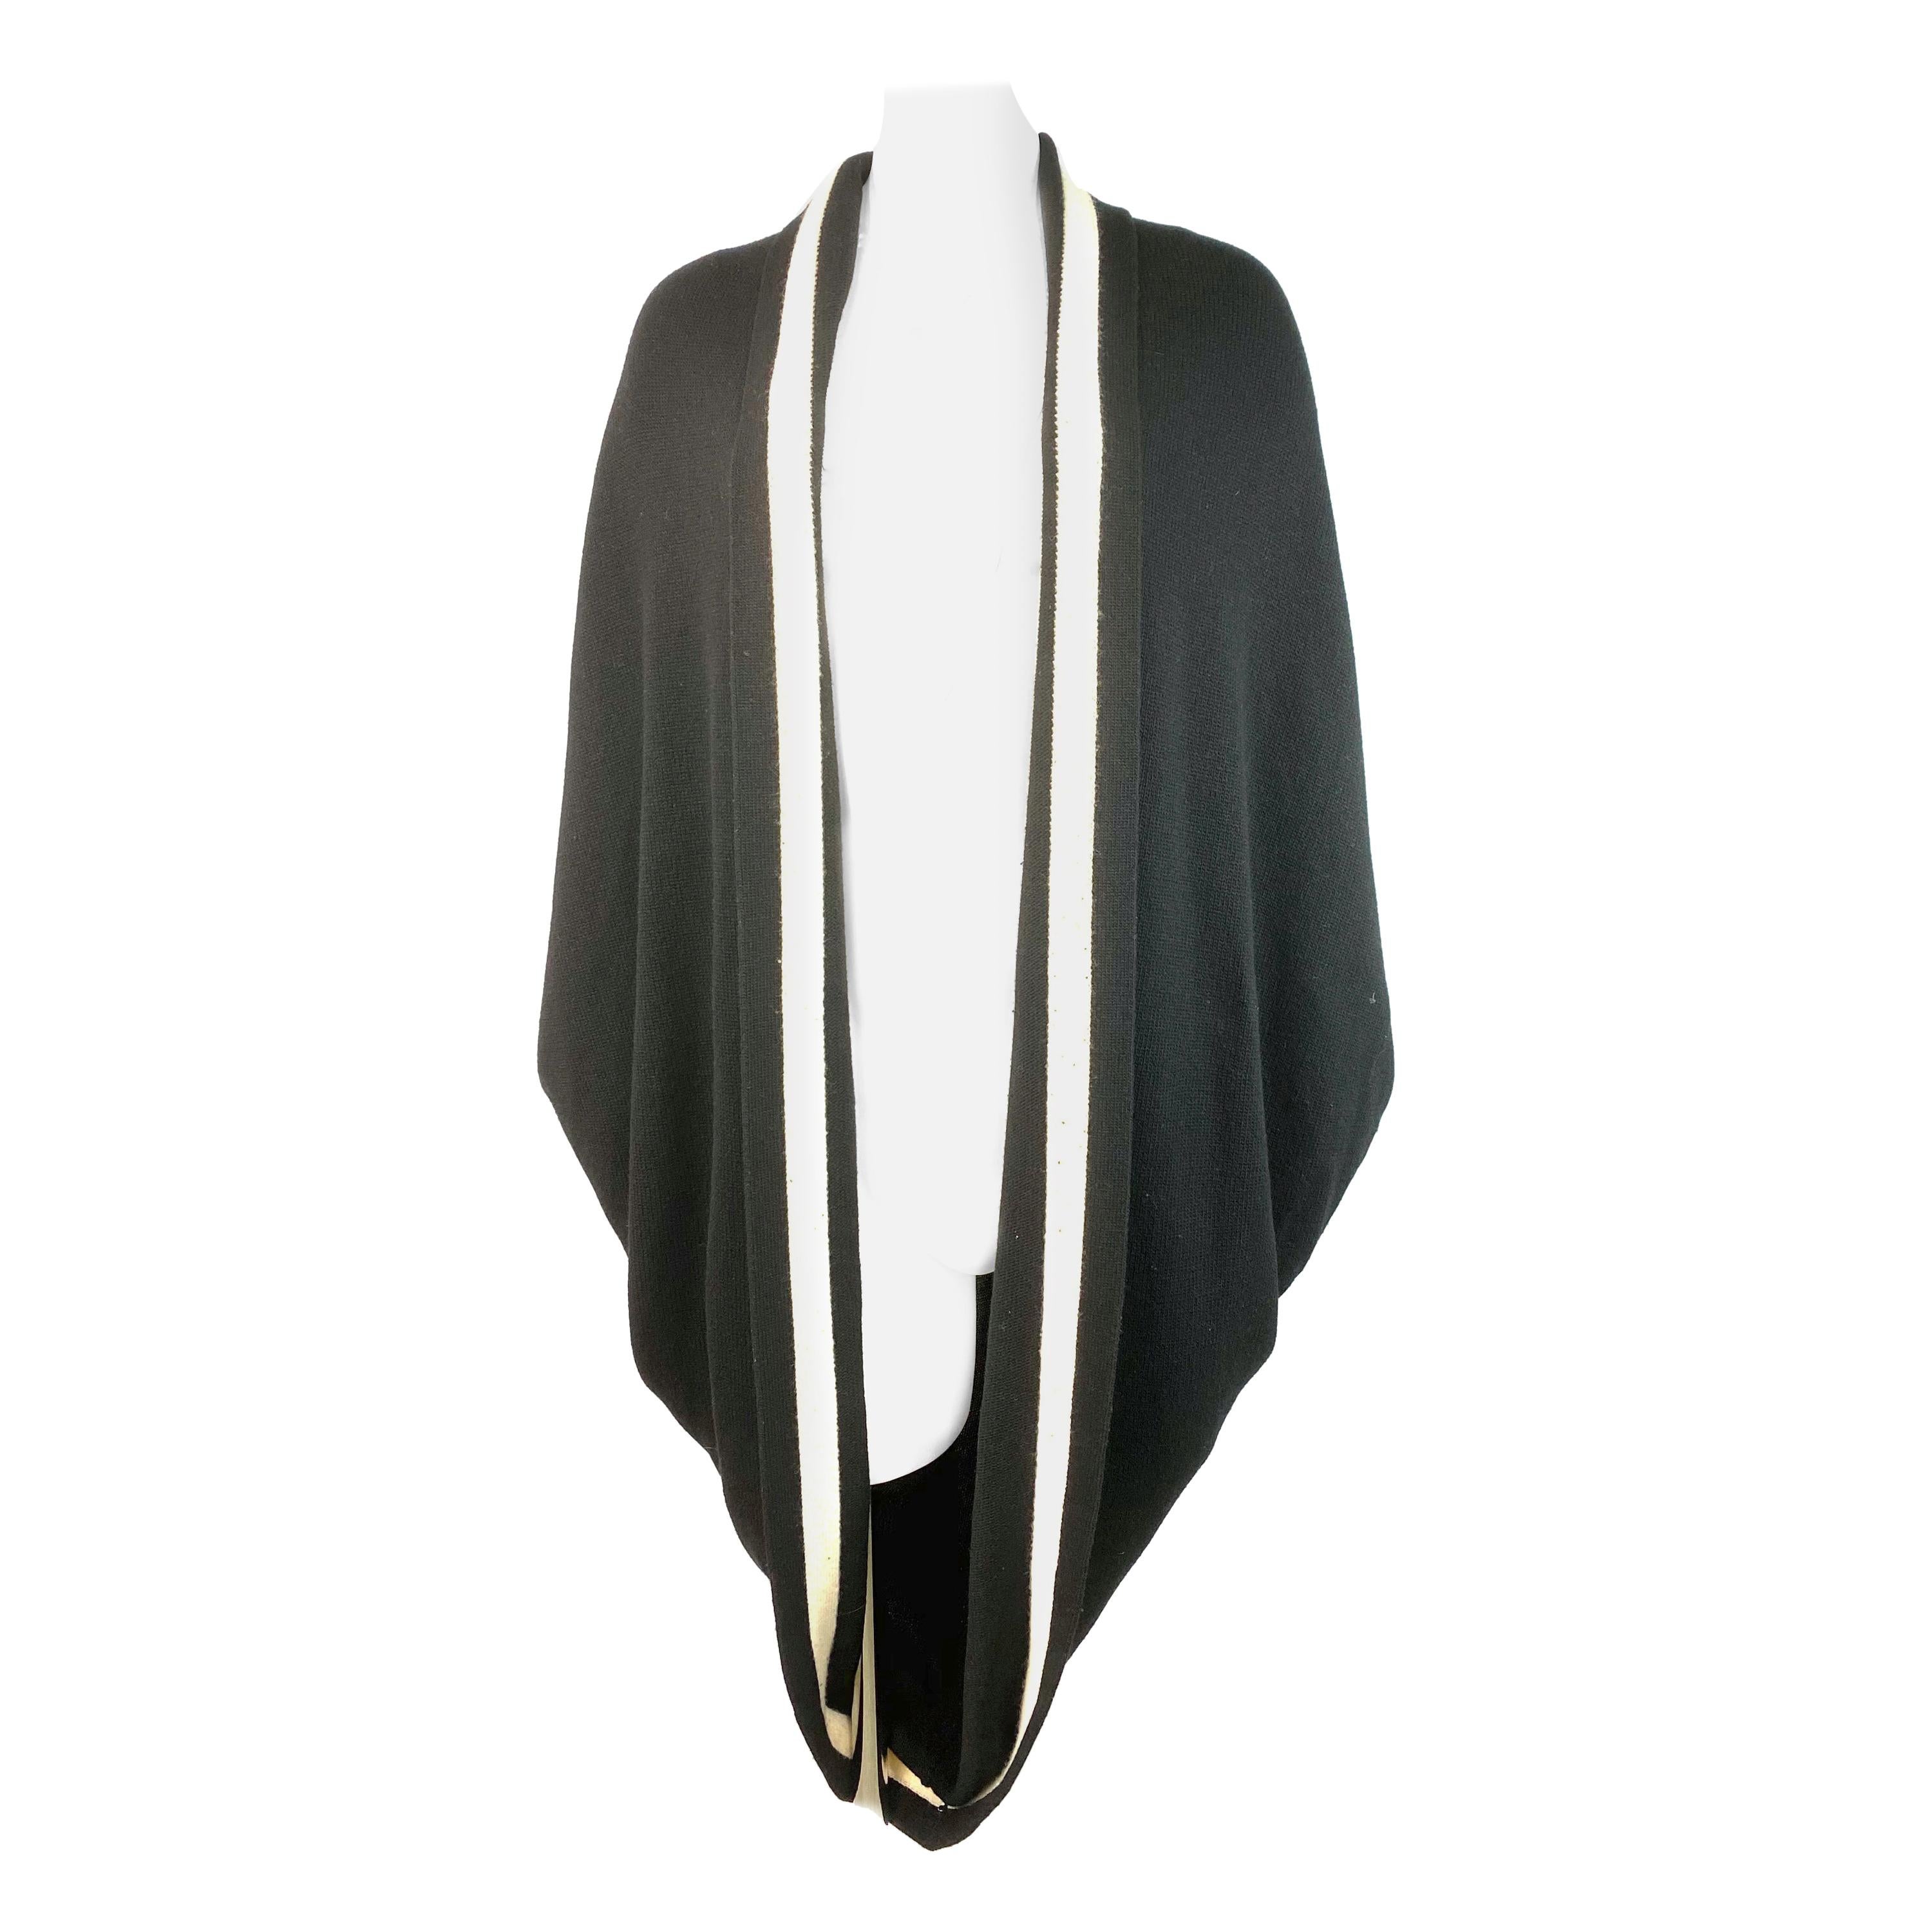 Alexander McQueen Black and White Knit Wool Cardigan Poncho Sweater Size M For Sale